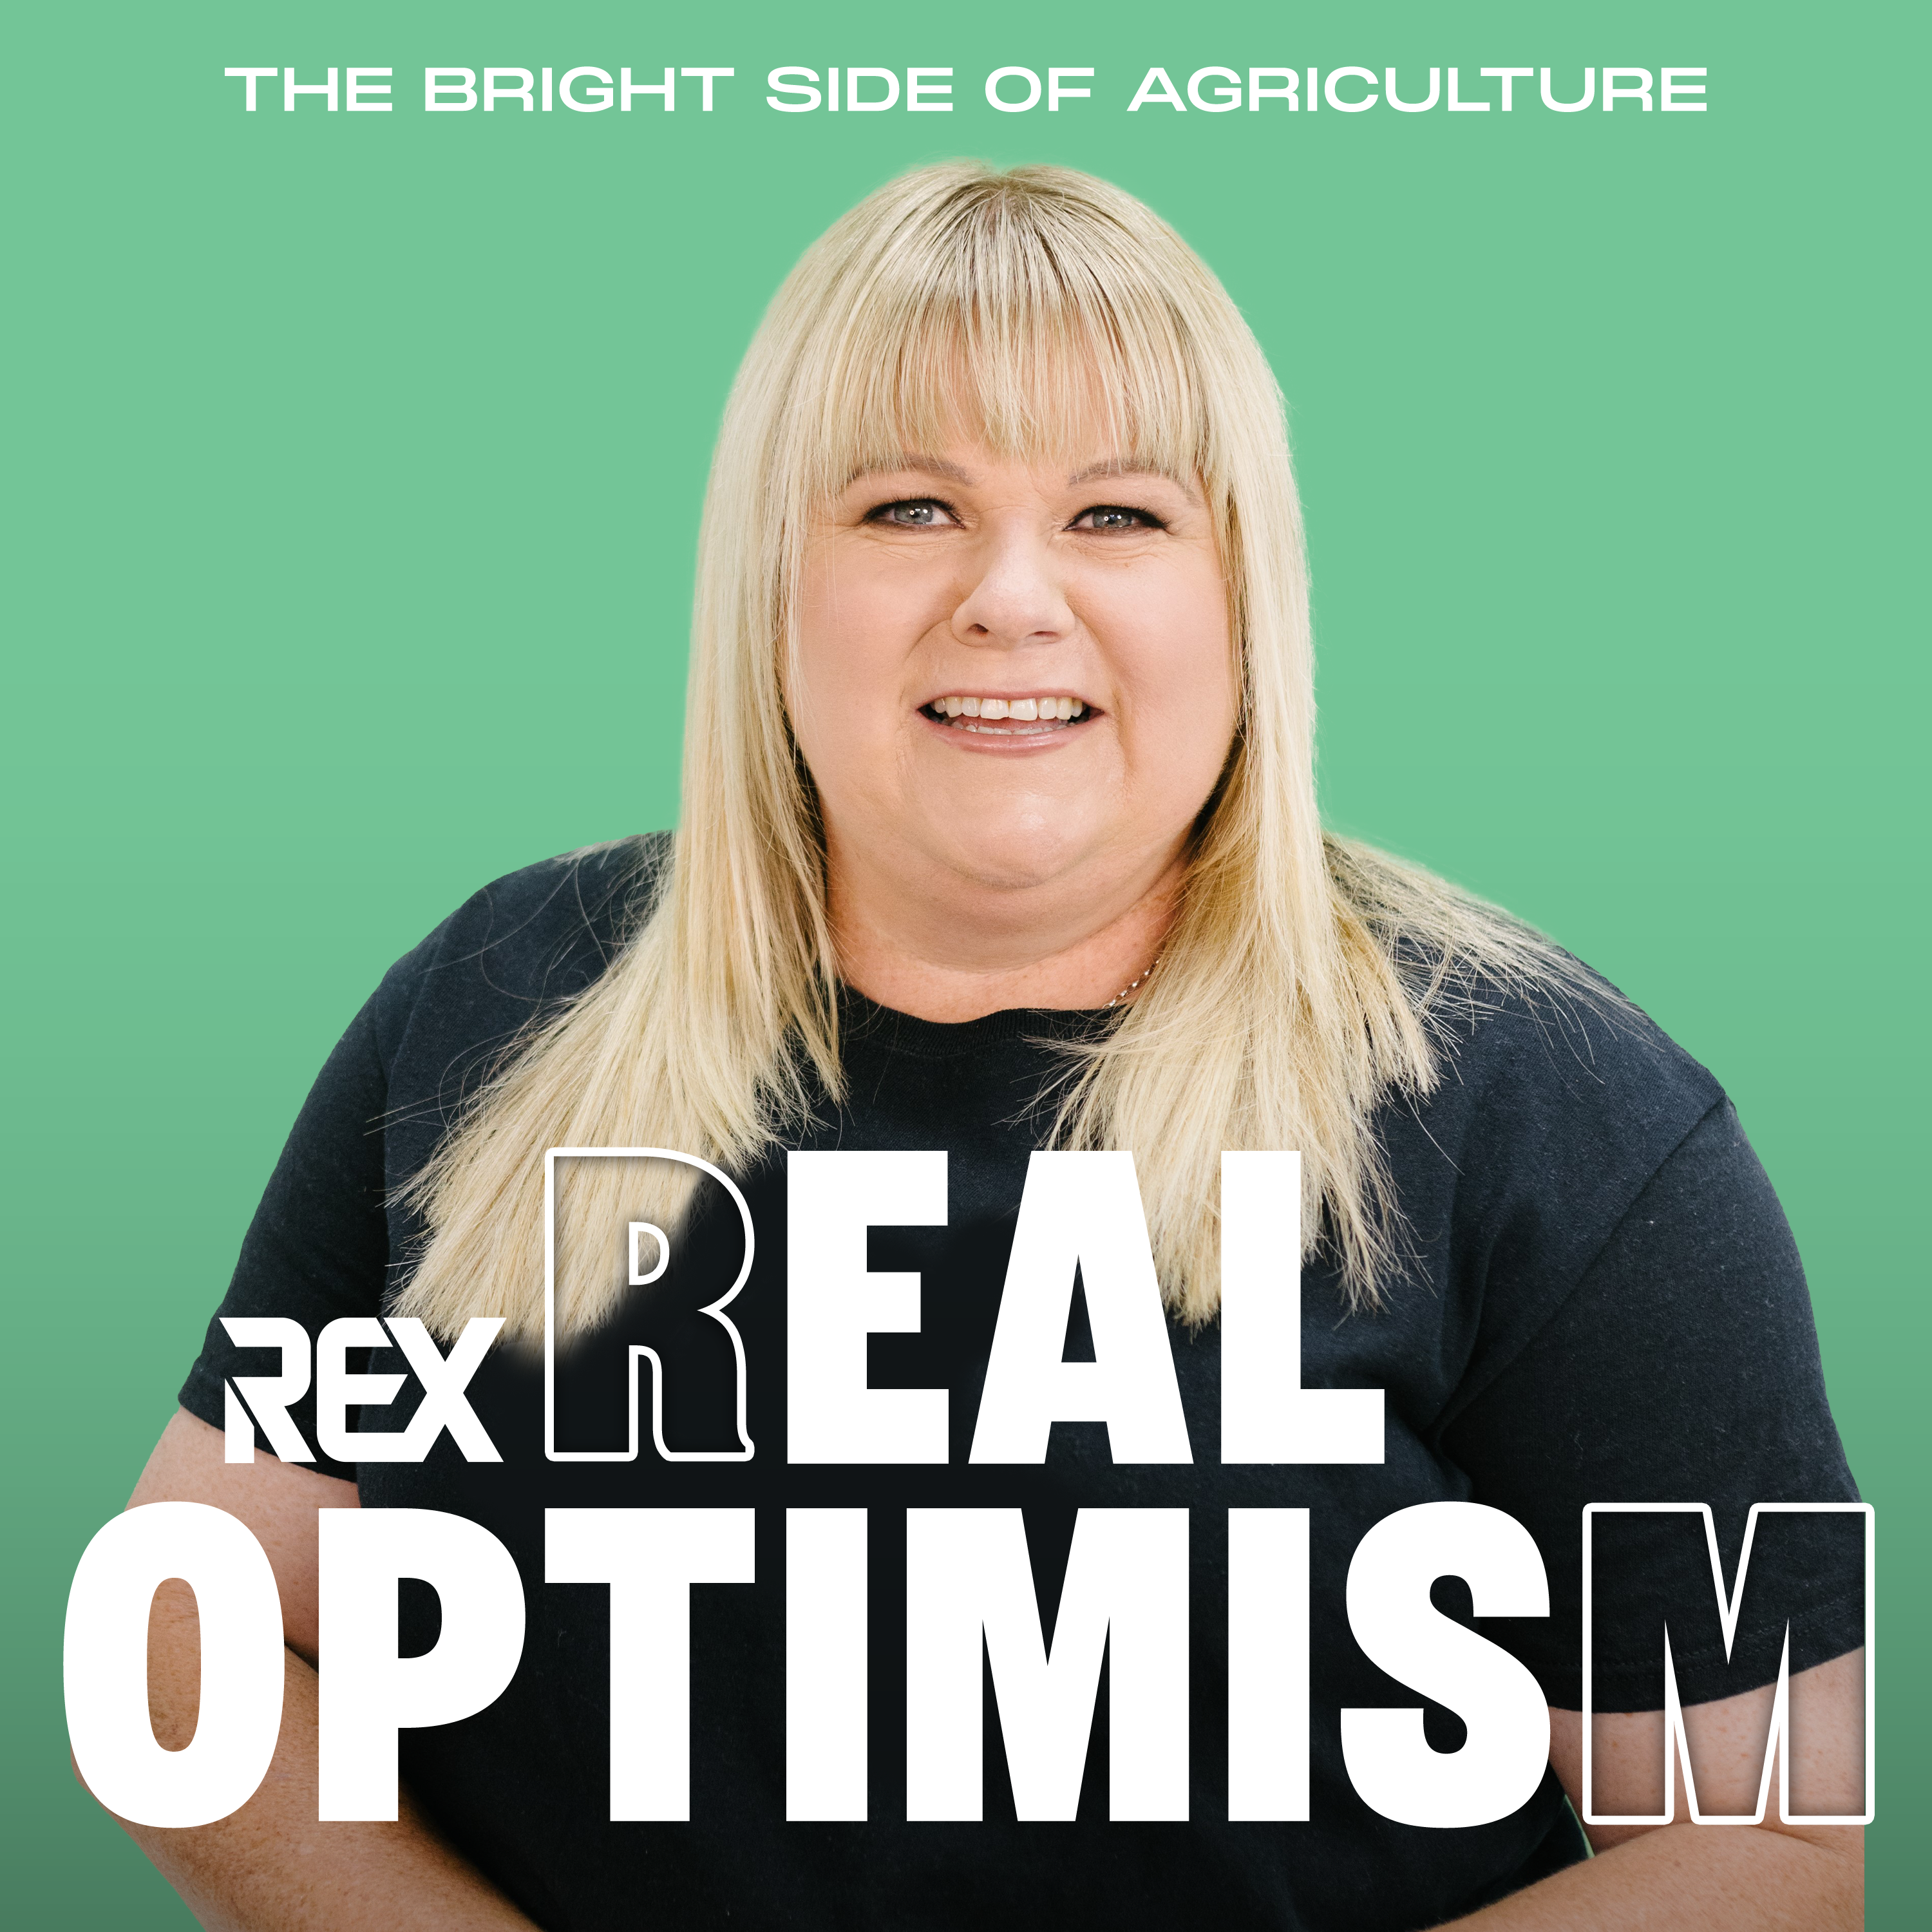 Natural Resources Engineer, Agri Leader + Farmer Keri Johnston stresses importance of water management in community welfare, environmental sustainability + more